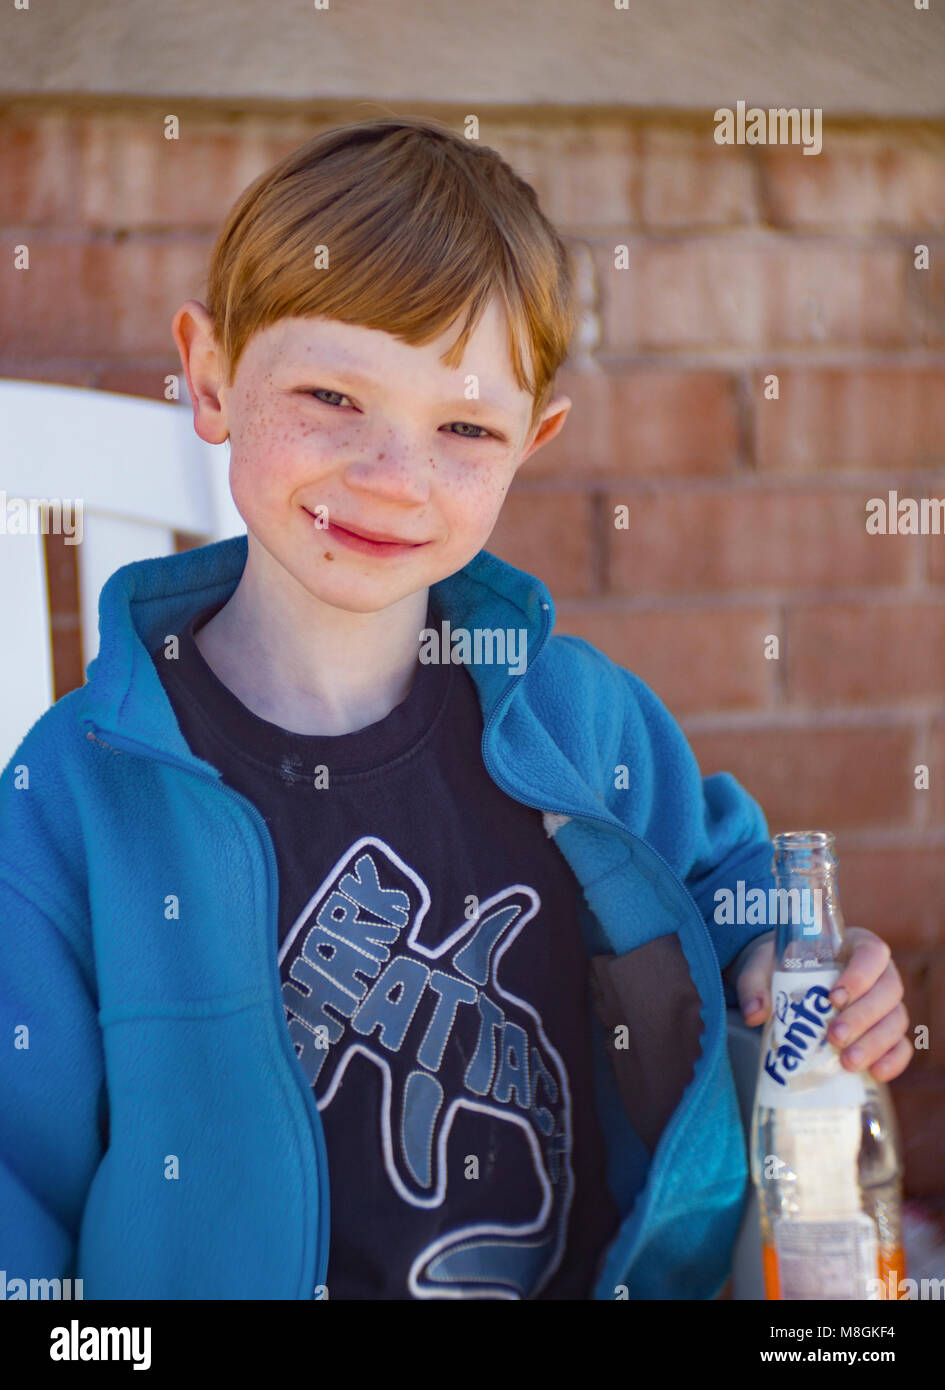 Boy with red hair and freckles, wearing a blue jacket, and holding a bottle of Orange Fanta soda. Stock Photo